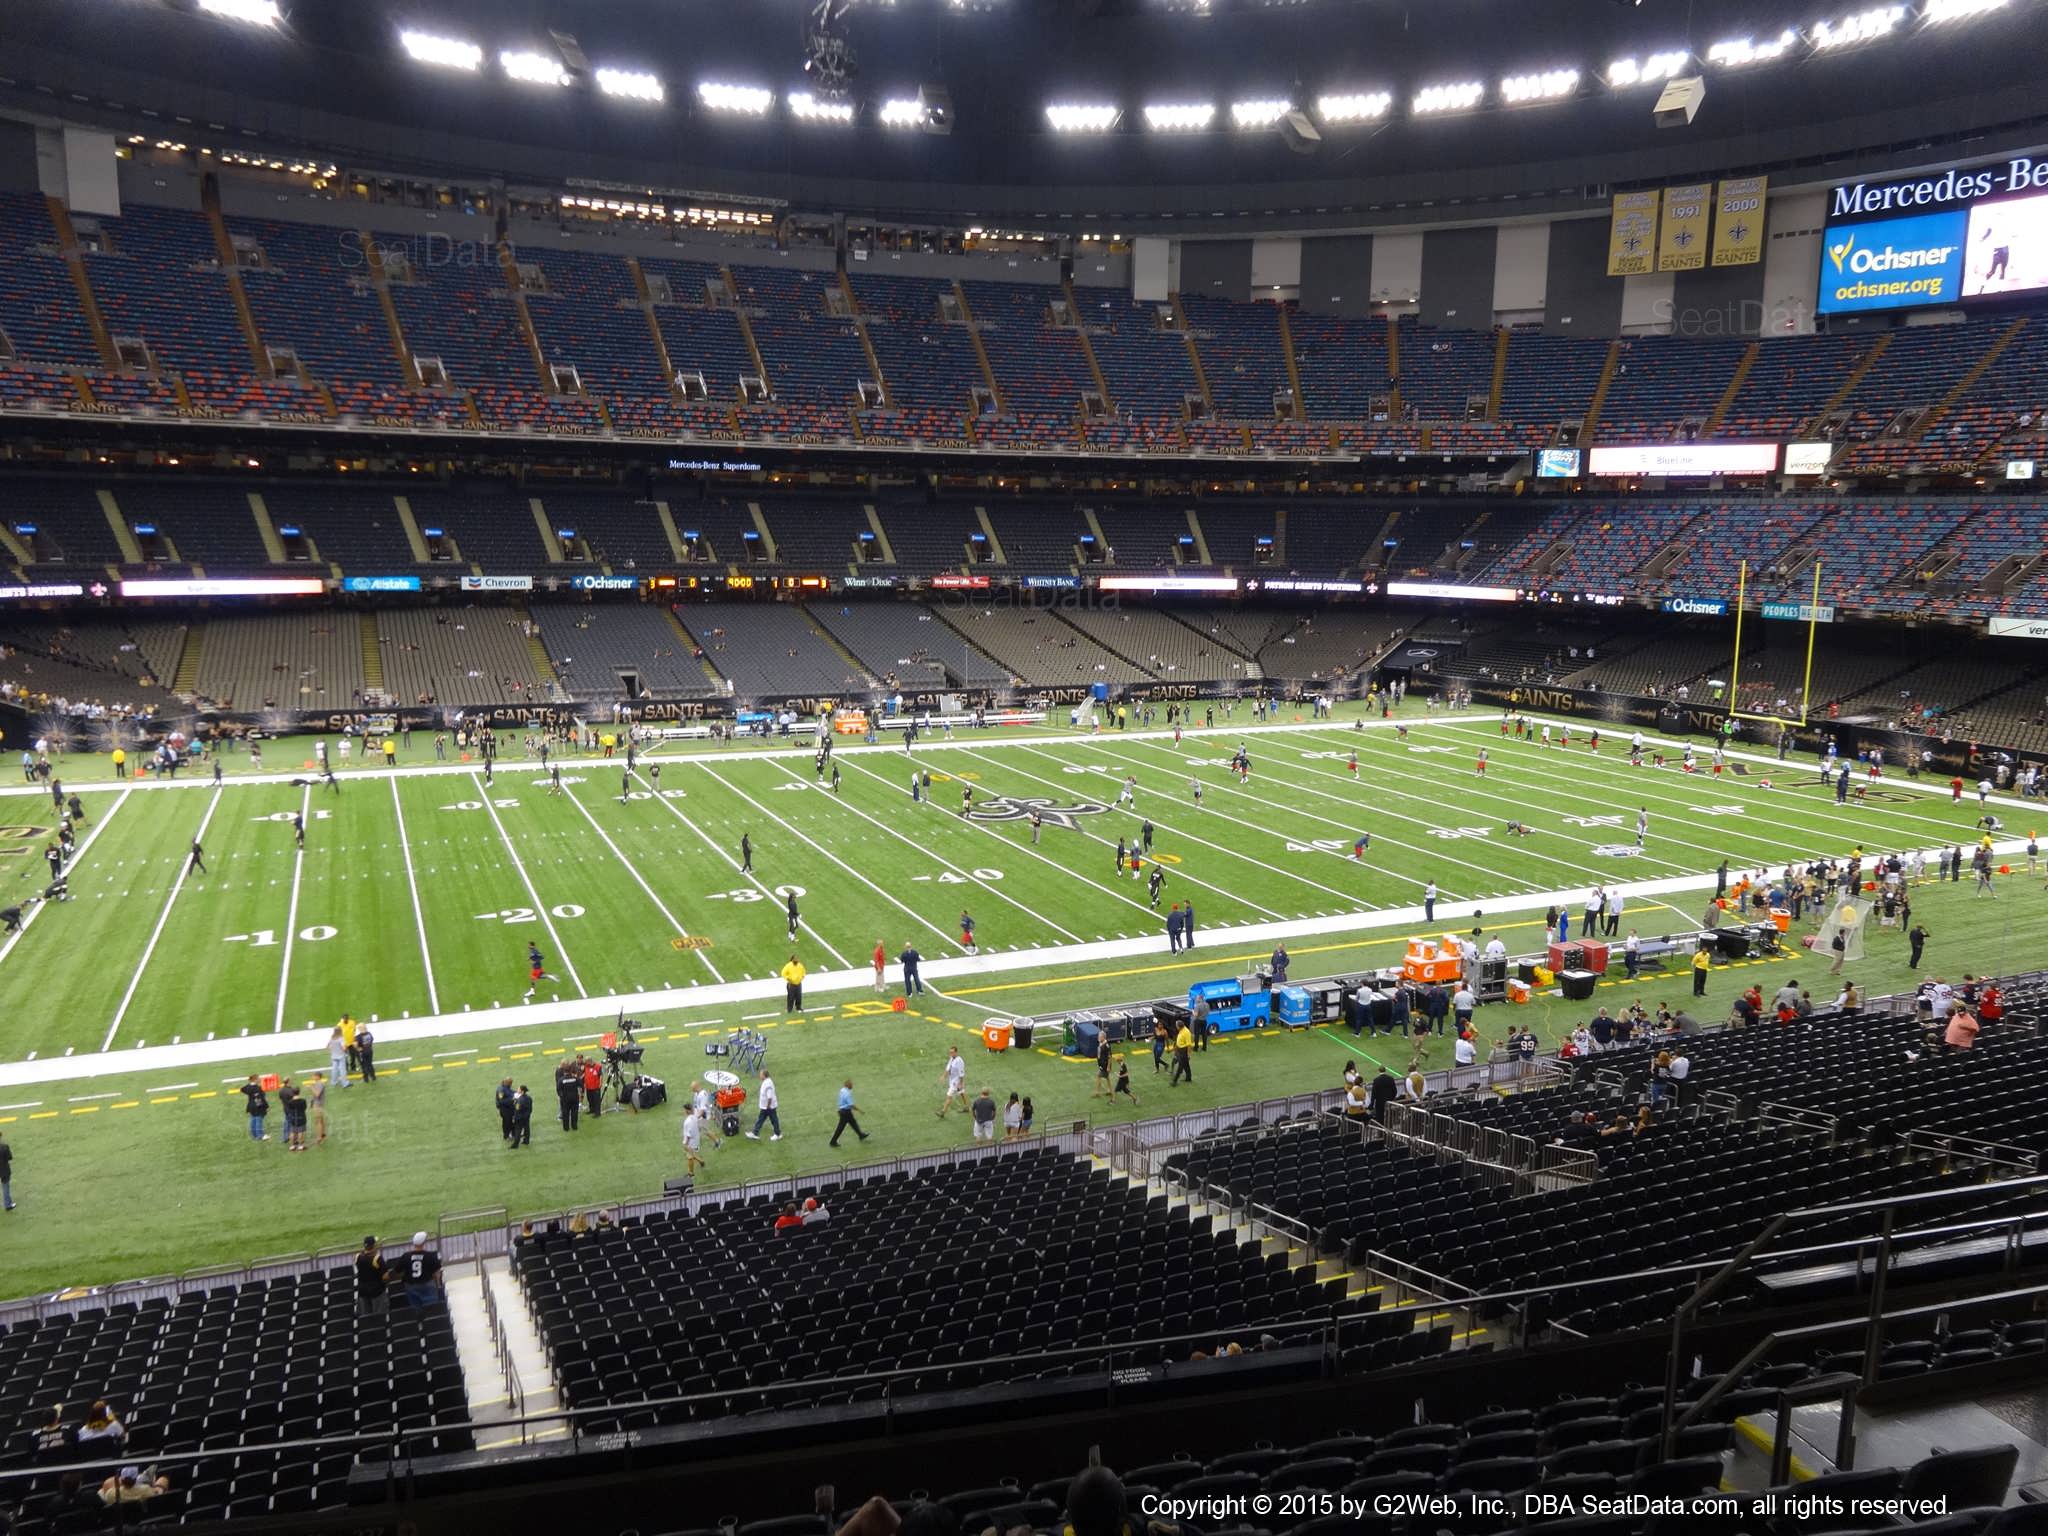 Seat view from section 315 at the Mercedes-Benz Superdome, home of the New Orleans Saints